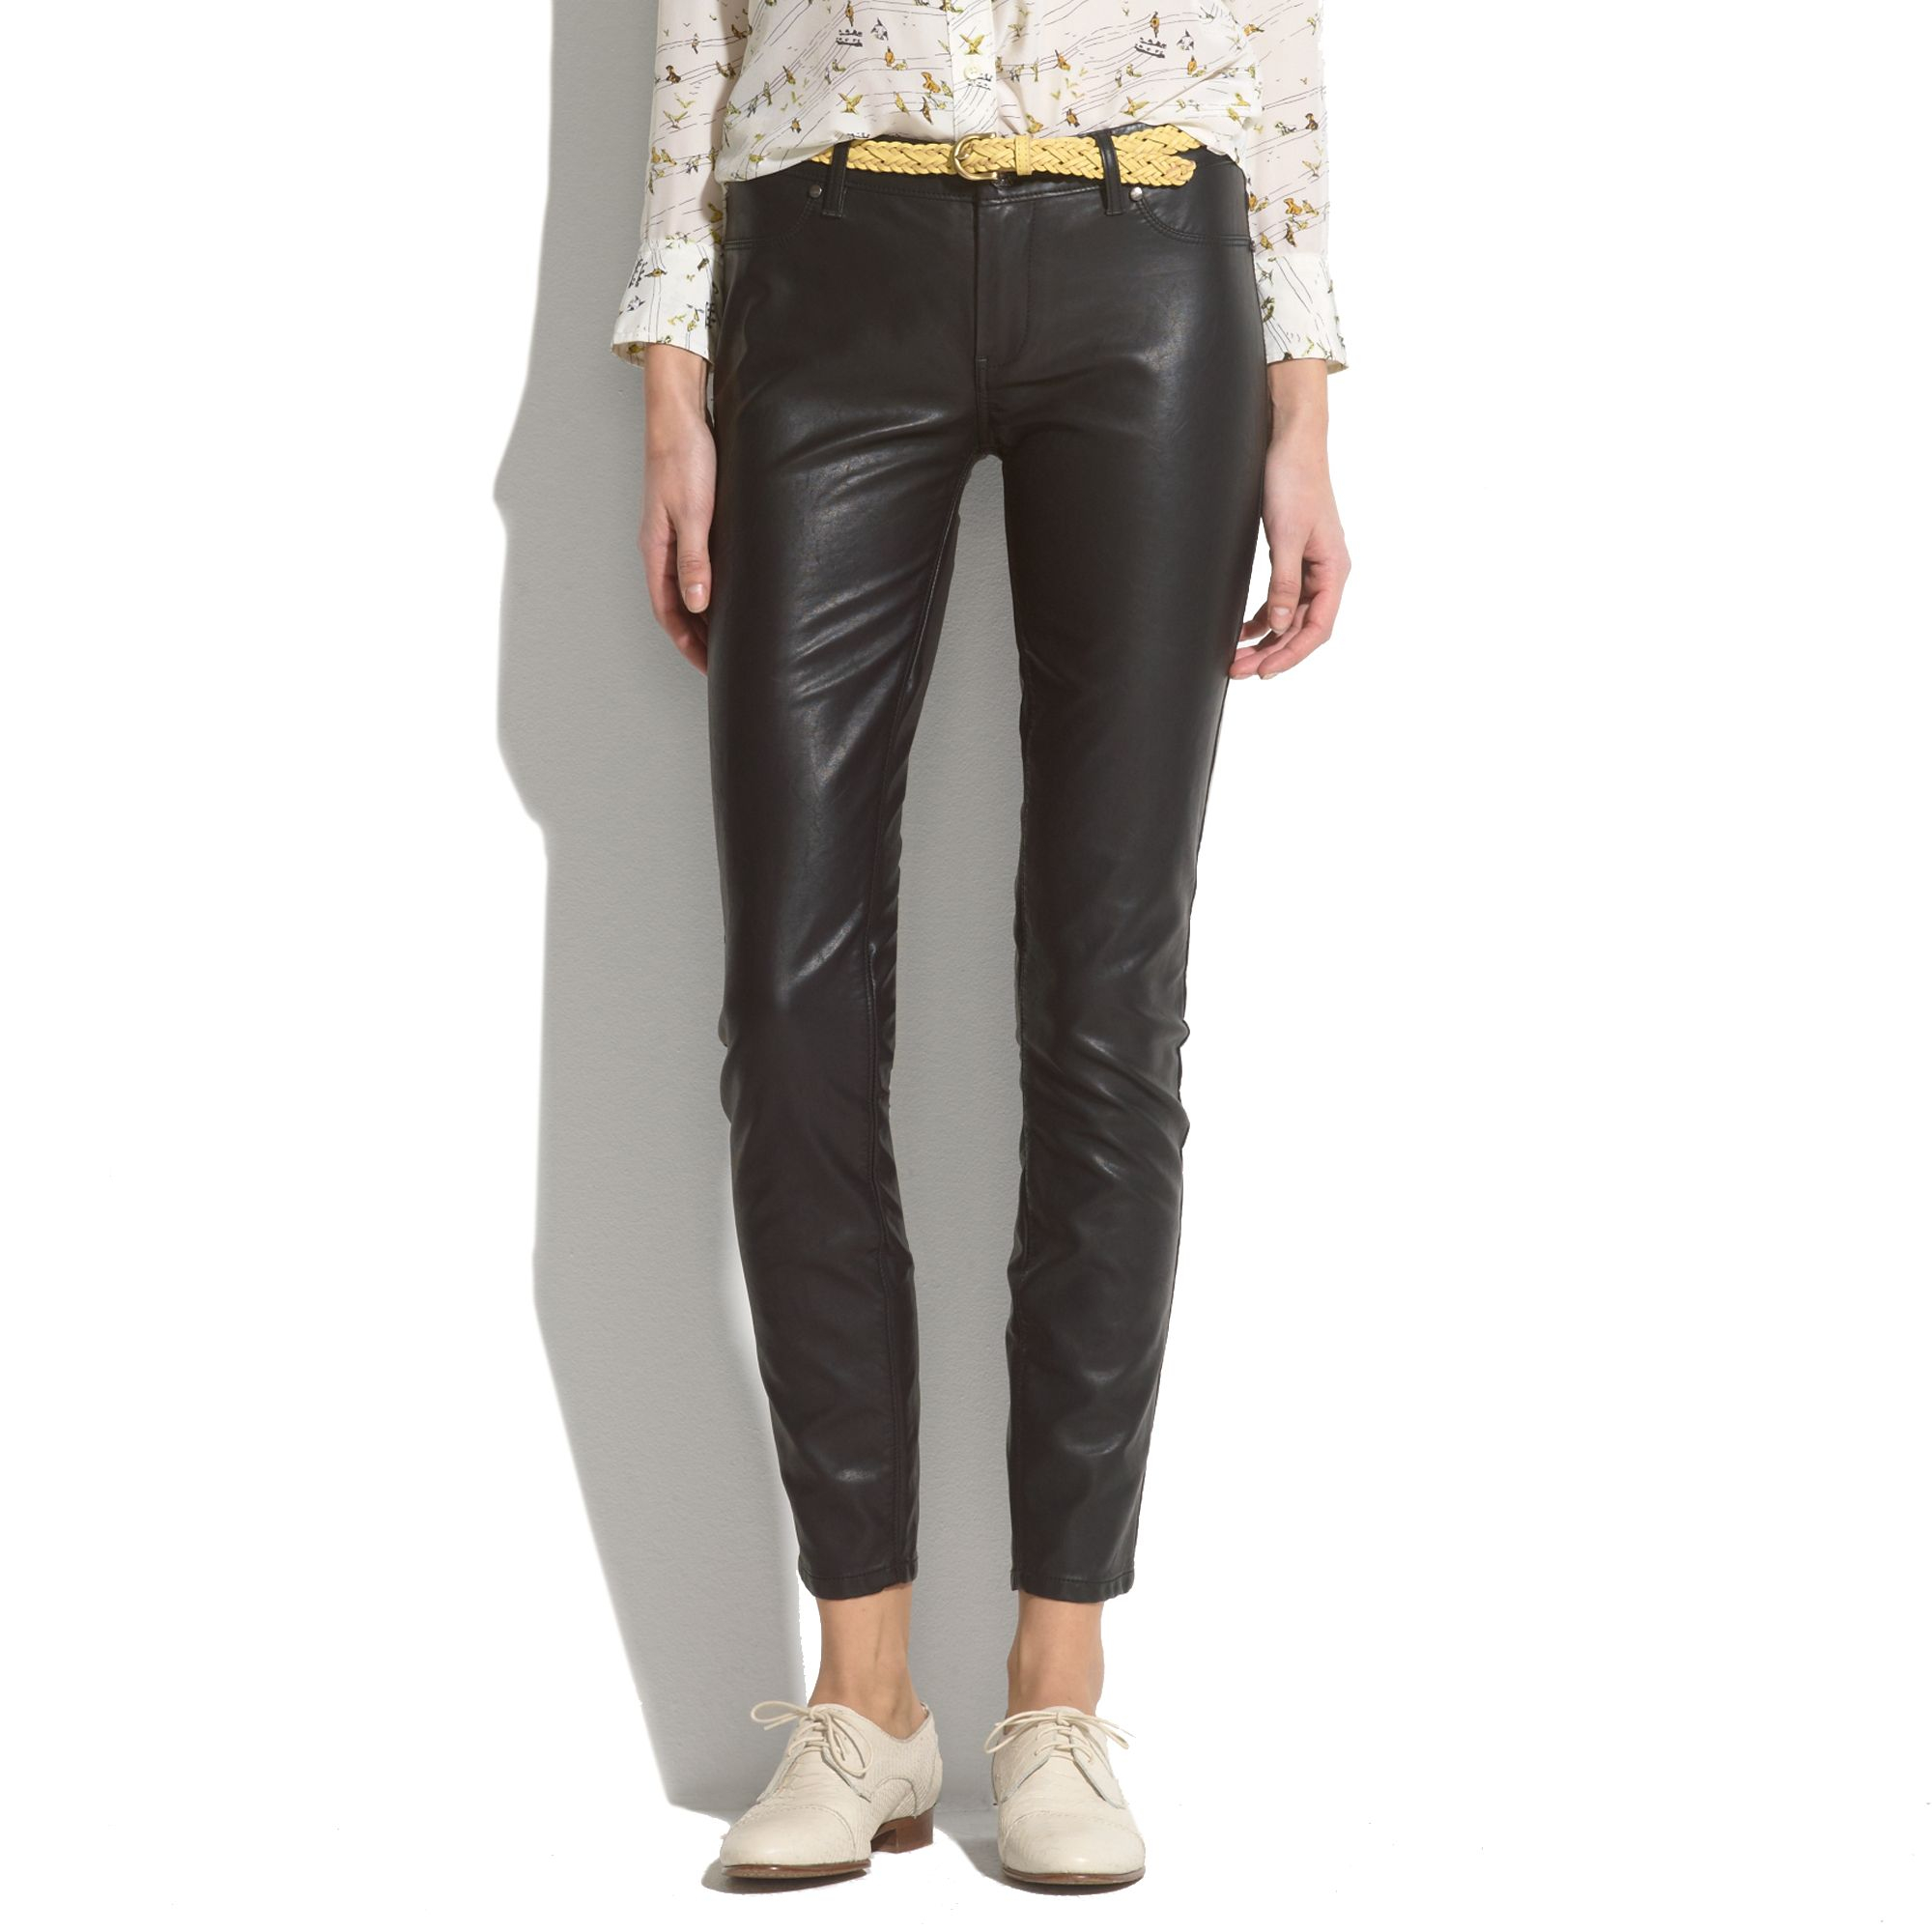 Madewell Blanknyc Faux Leather Pants in Black - Lyst